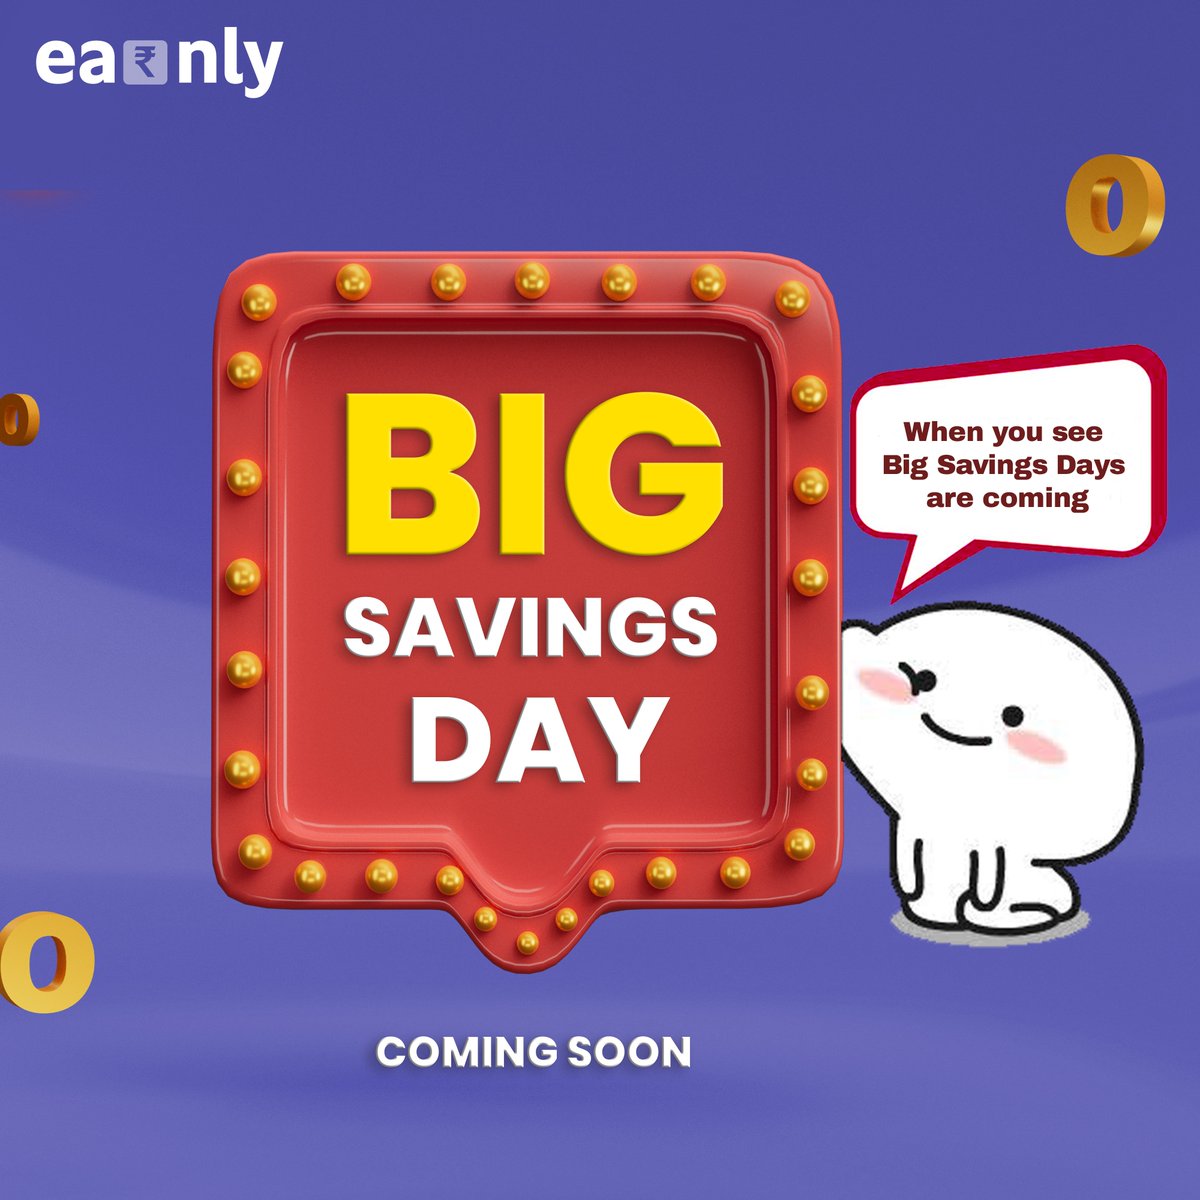 '🎉 Get Ready for Big Savings Days! 🛍️ Don't Miss Out on Epic Deals and Discounts! 💰 #BigSavingsDays'

onlineshoppingapp#onlineincomeapp#cashbackworld #onlineshopping #shoppingonline #BigSavings#SaleAlert
#SavingsEvent#Discounts#ShopSmart#SavingsSpree#MassiveDiscounts#